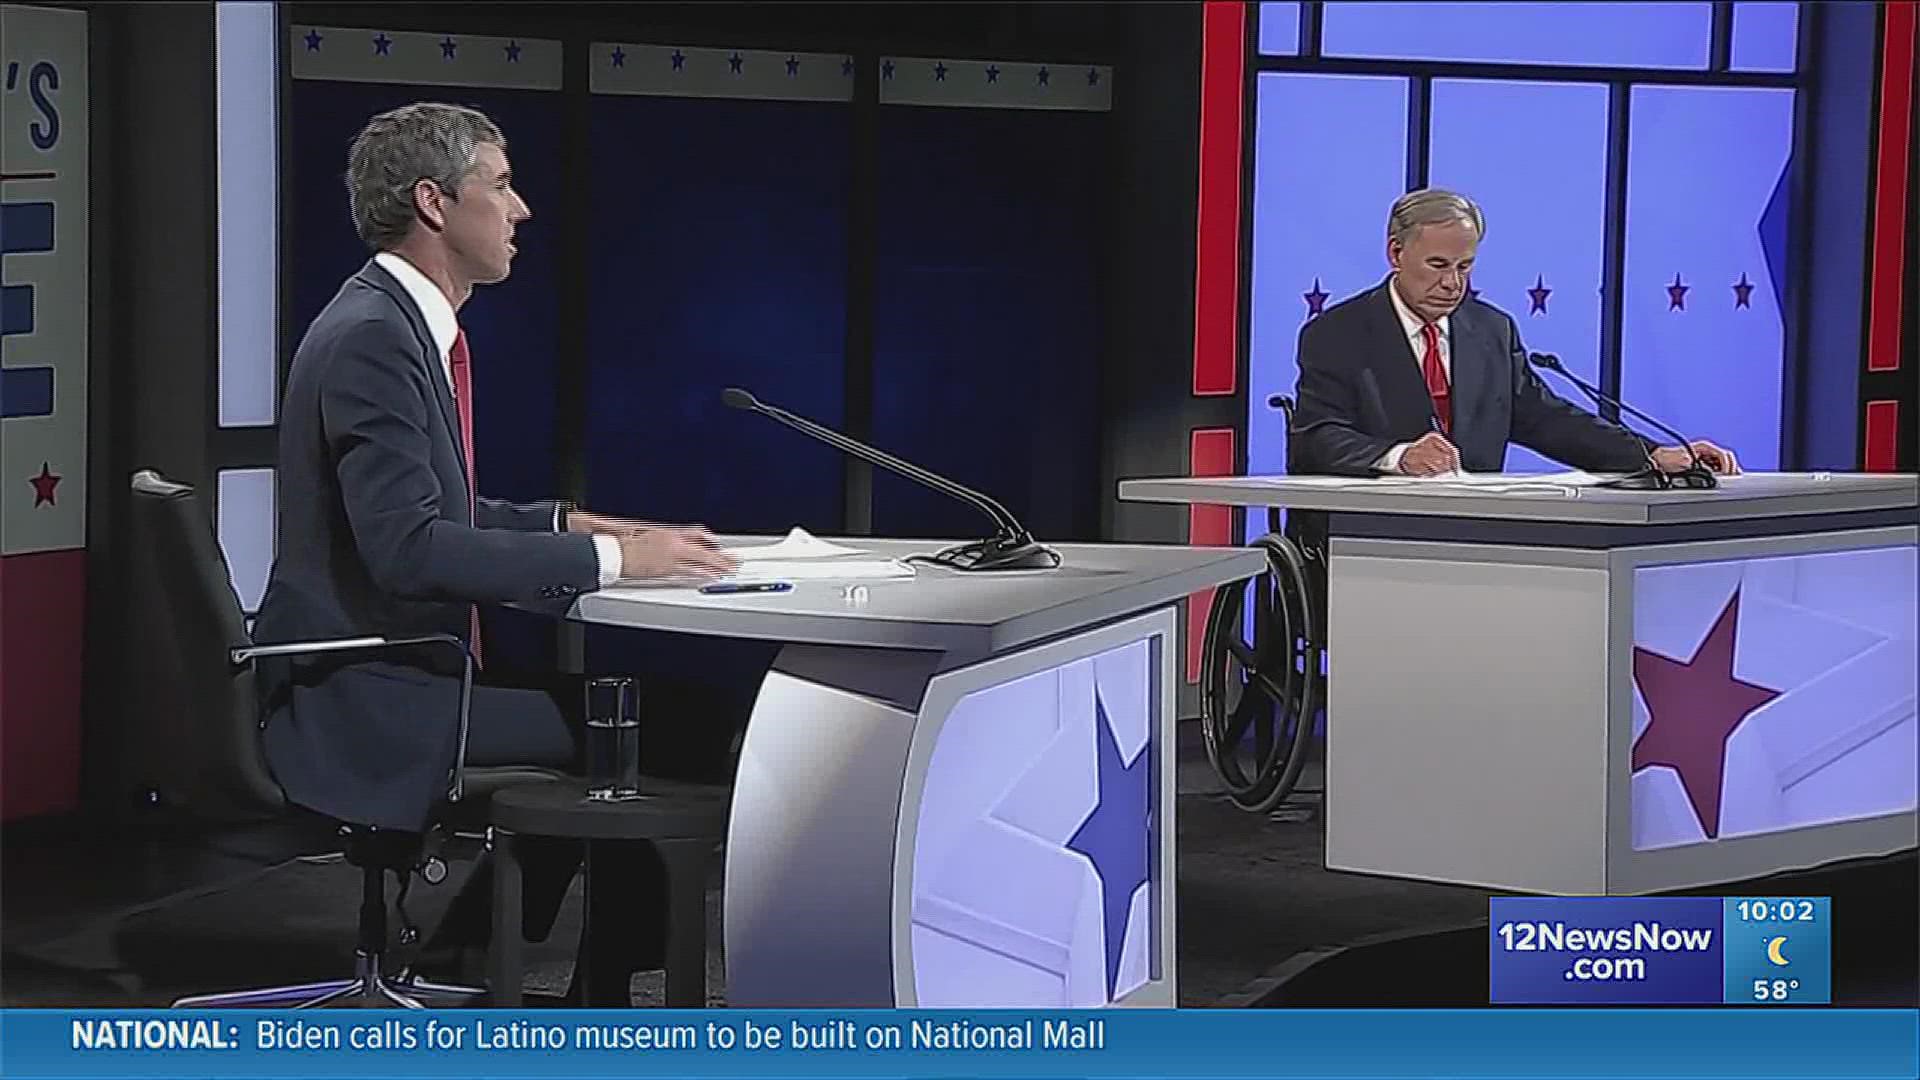 The one-hour debate took place in Edinburg. It was the only scheduled debate between the two candidates before the November election.